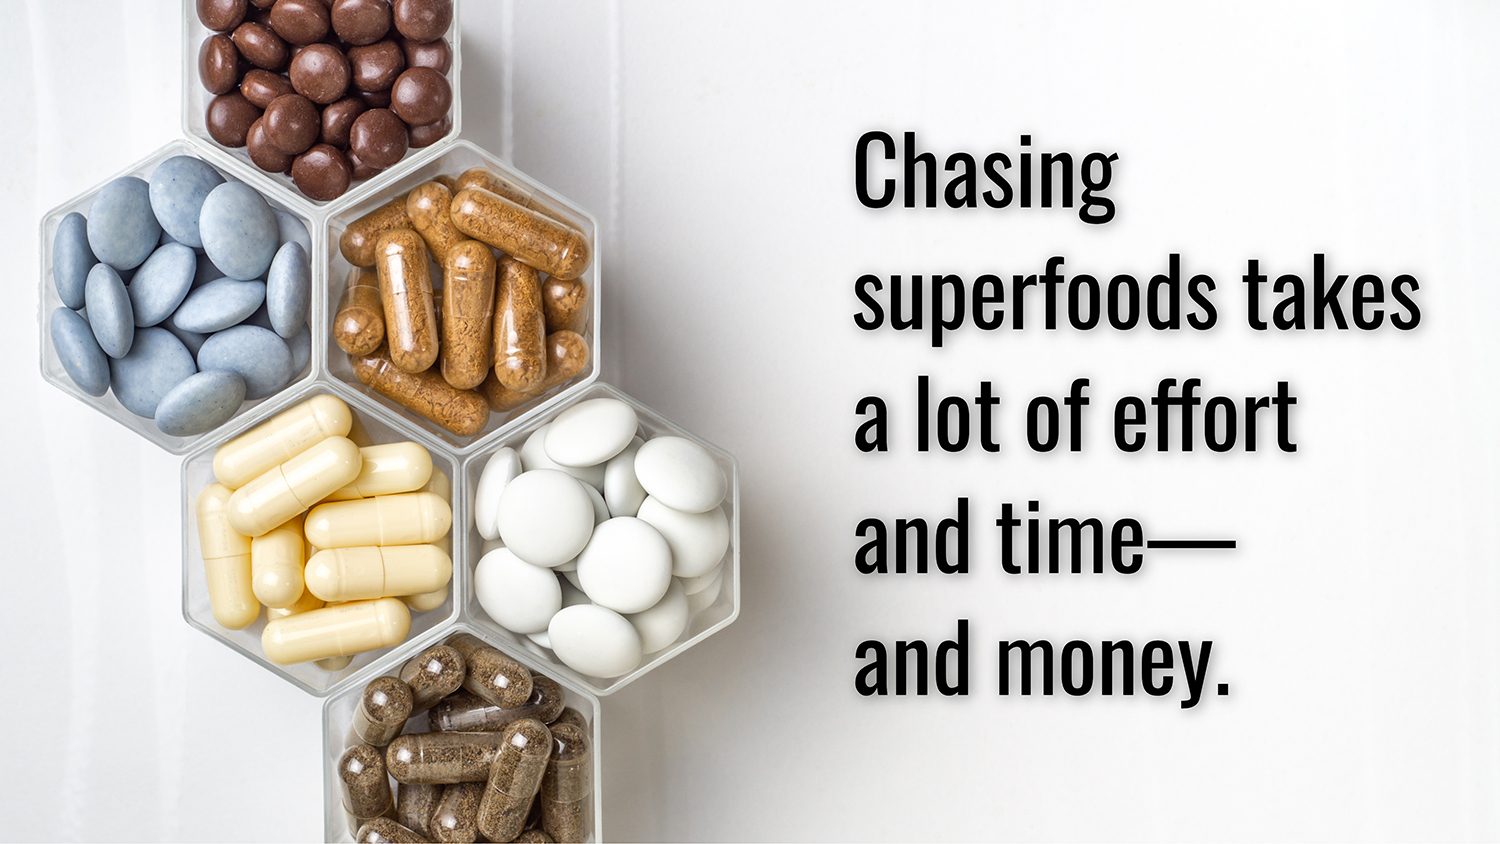 Are Supplements Good For You - Chasing Superfoods